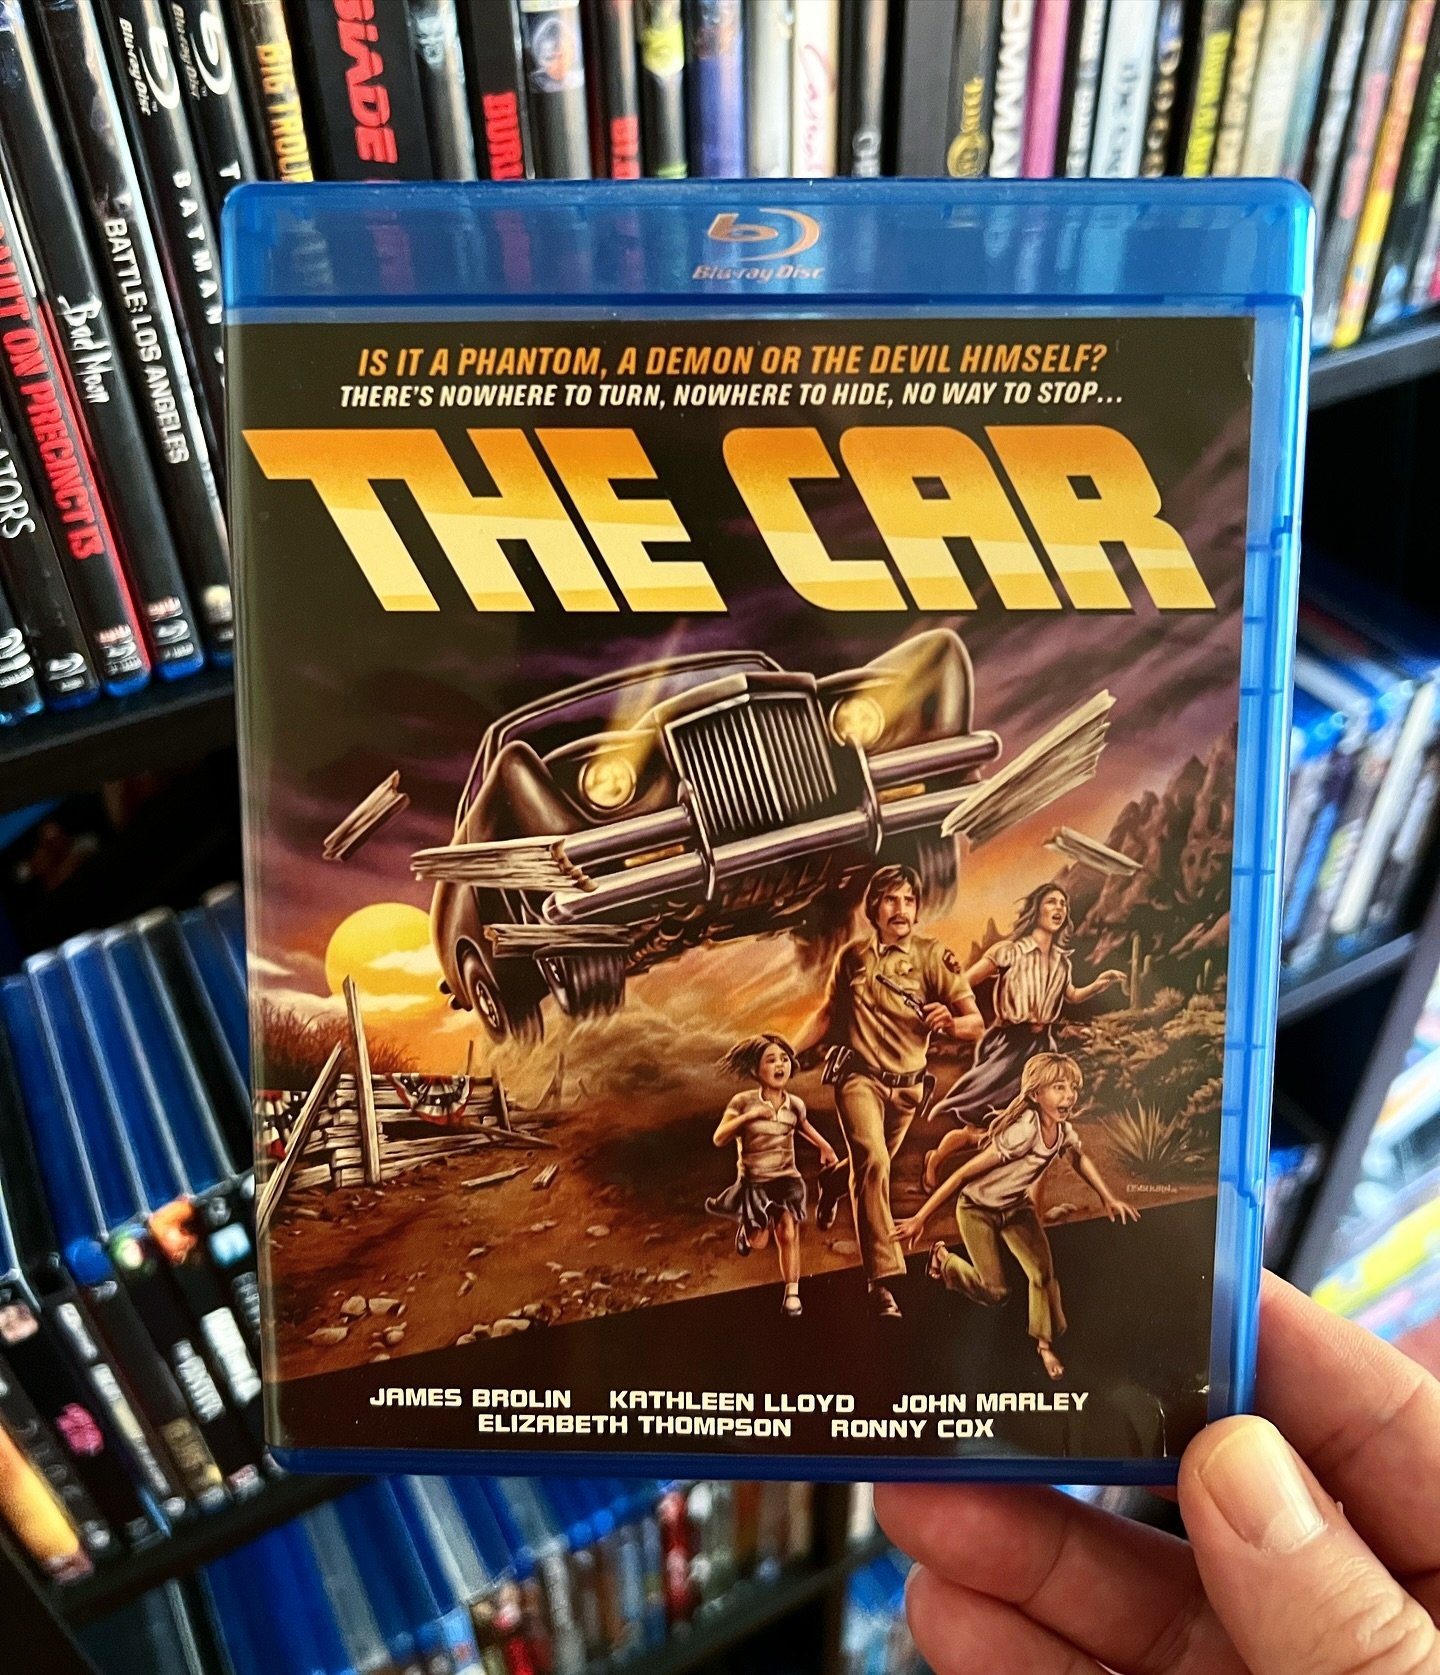 Happy 47th anniversary to THE CAR! It came out in the US on this day in 1977. Listen to our review in celebration! It&rsquo;s available now on Apple Podcasts, Spotify, and all major pod-apps.

www.podcastingafterdark.com/padepisodes/the-car-1977
&mda